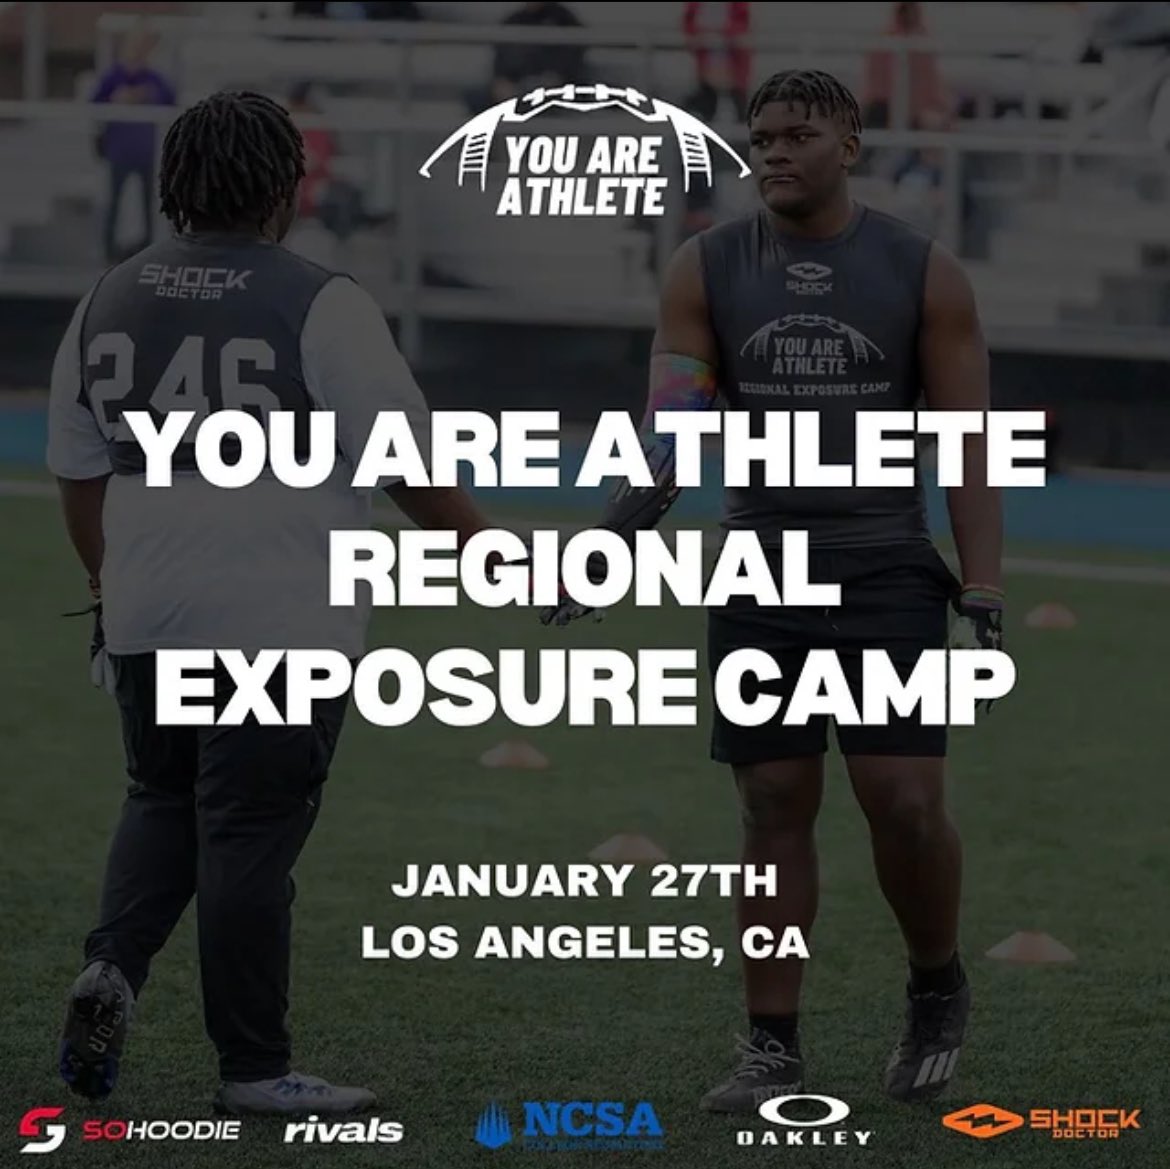 THANK YOU @youareathlete and @ShockDoctor for the invitation to show my skills and abilities at you football camp series @TCUFootball @BeaverFootball @KbTheStable @CoachFarrarMesa @Coachmattwade